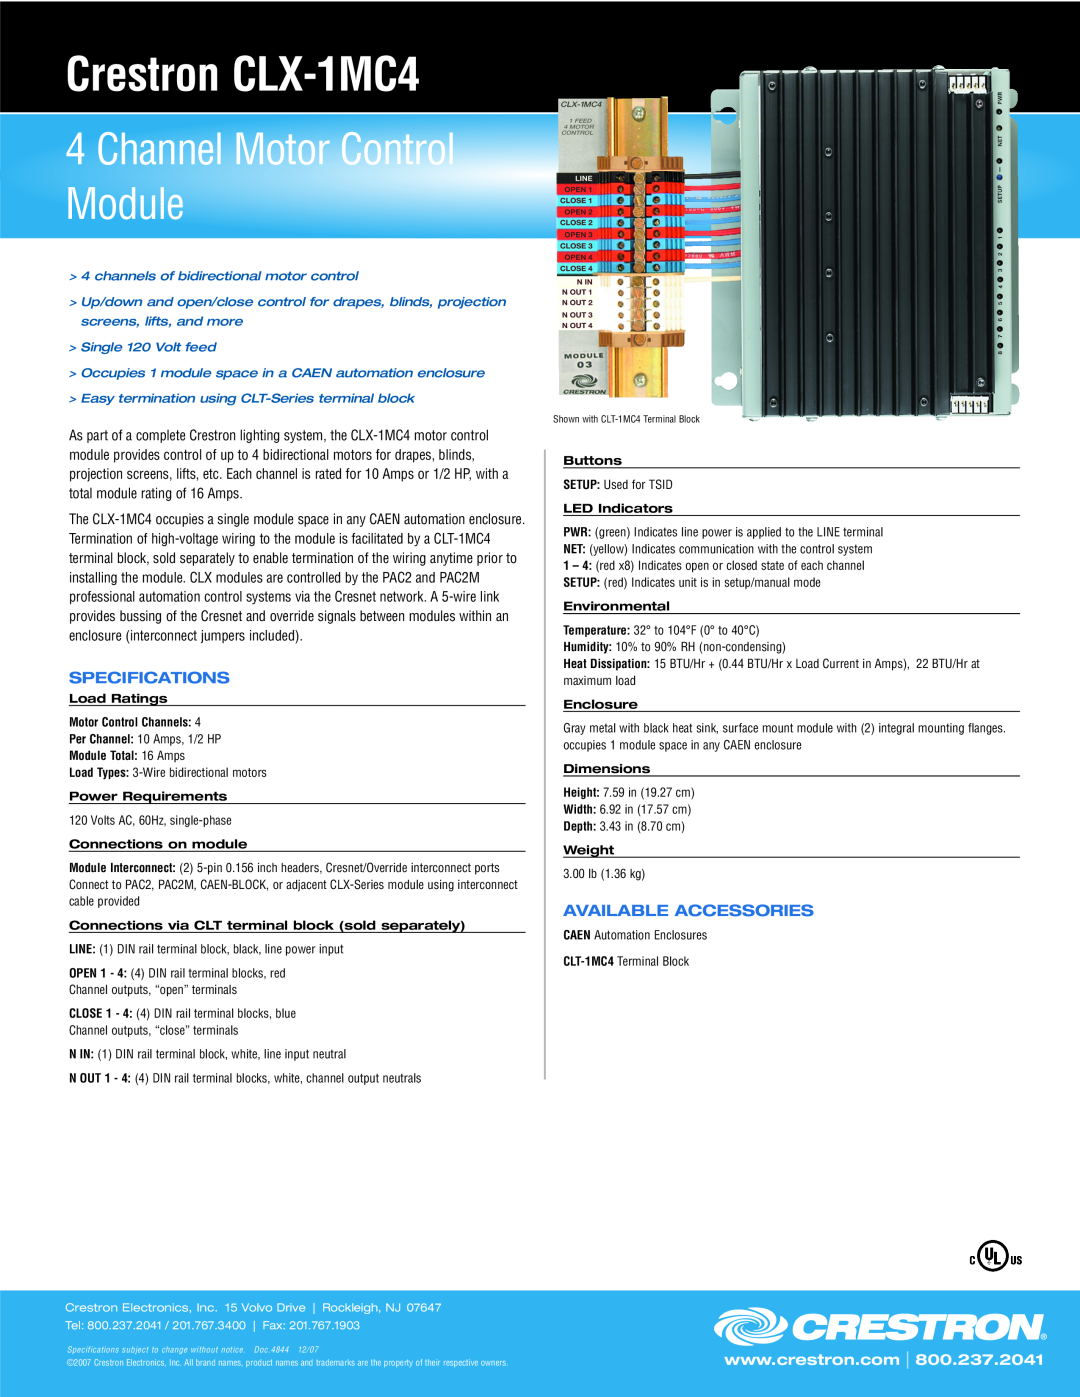 Crestron electronic specifications Crestron CLX-1MC4, Channel Motor Control Module, Specifications 